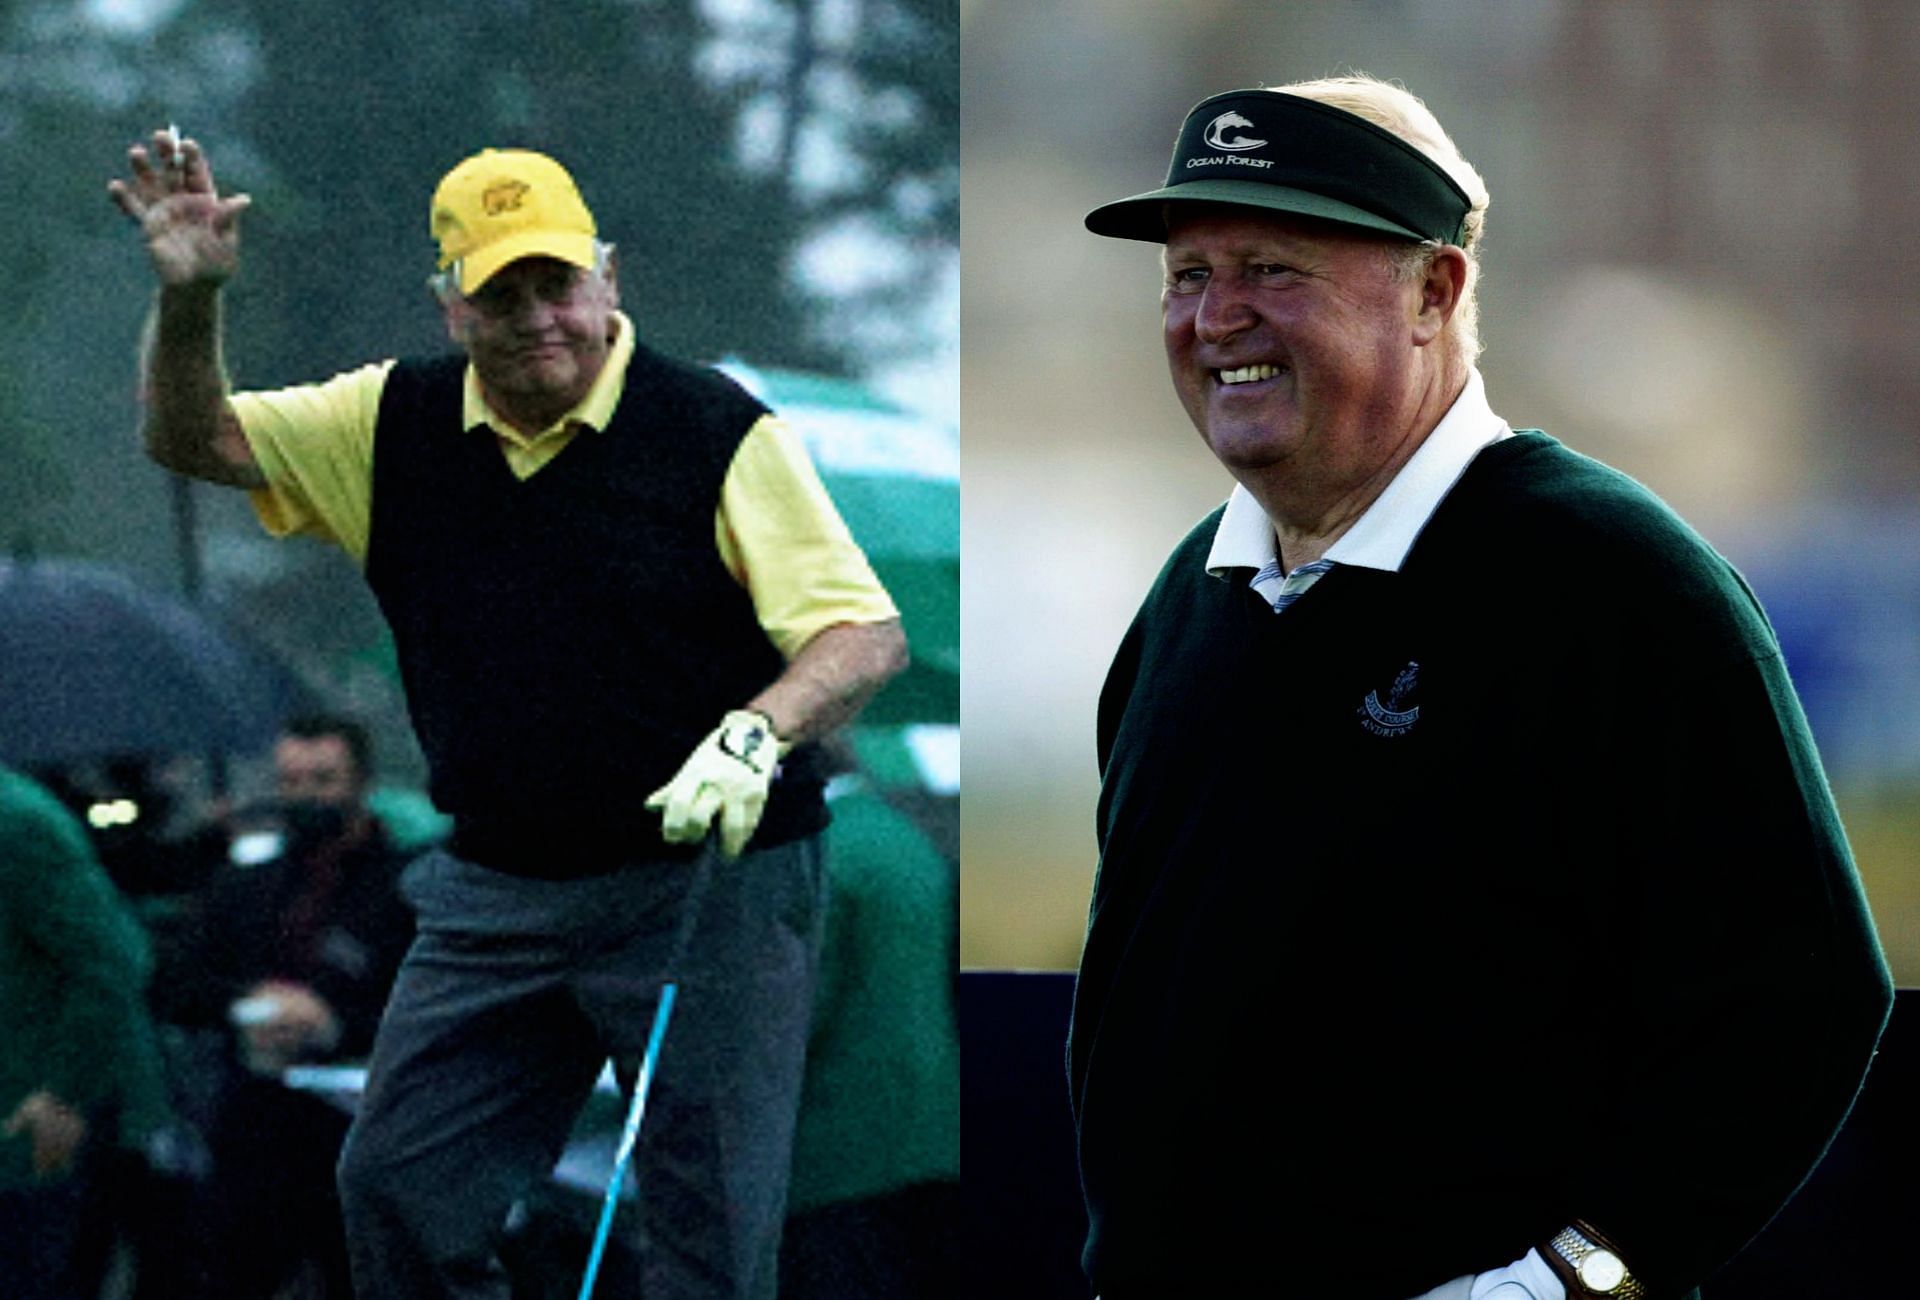 Jack Nicklaus and Sir Michael Bonallack (Image via Getty and X @dunhilllinks).